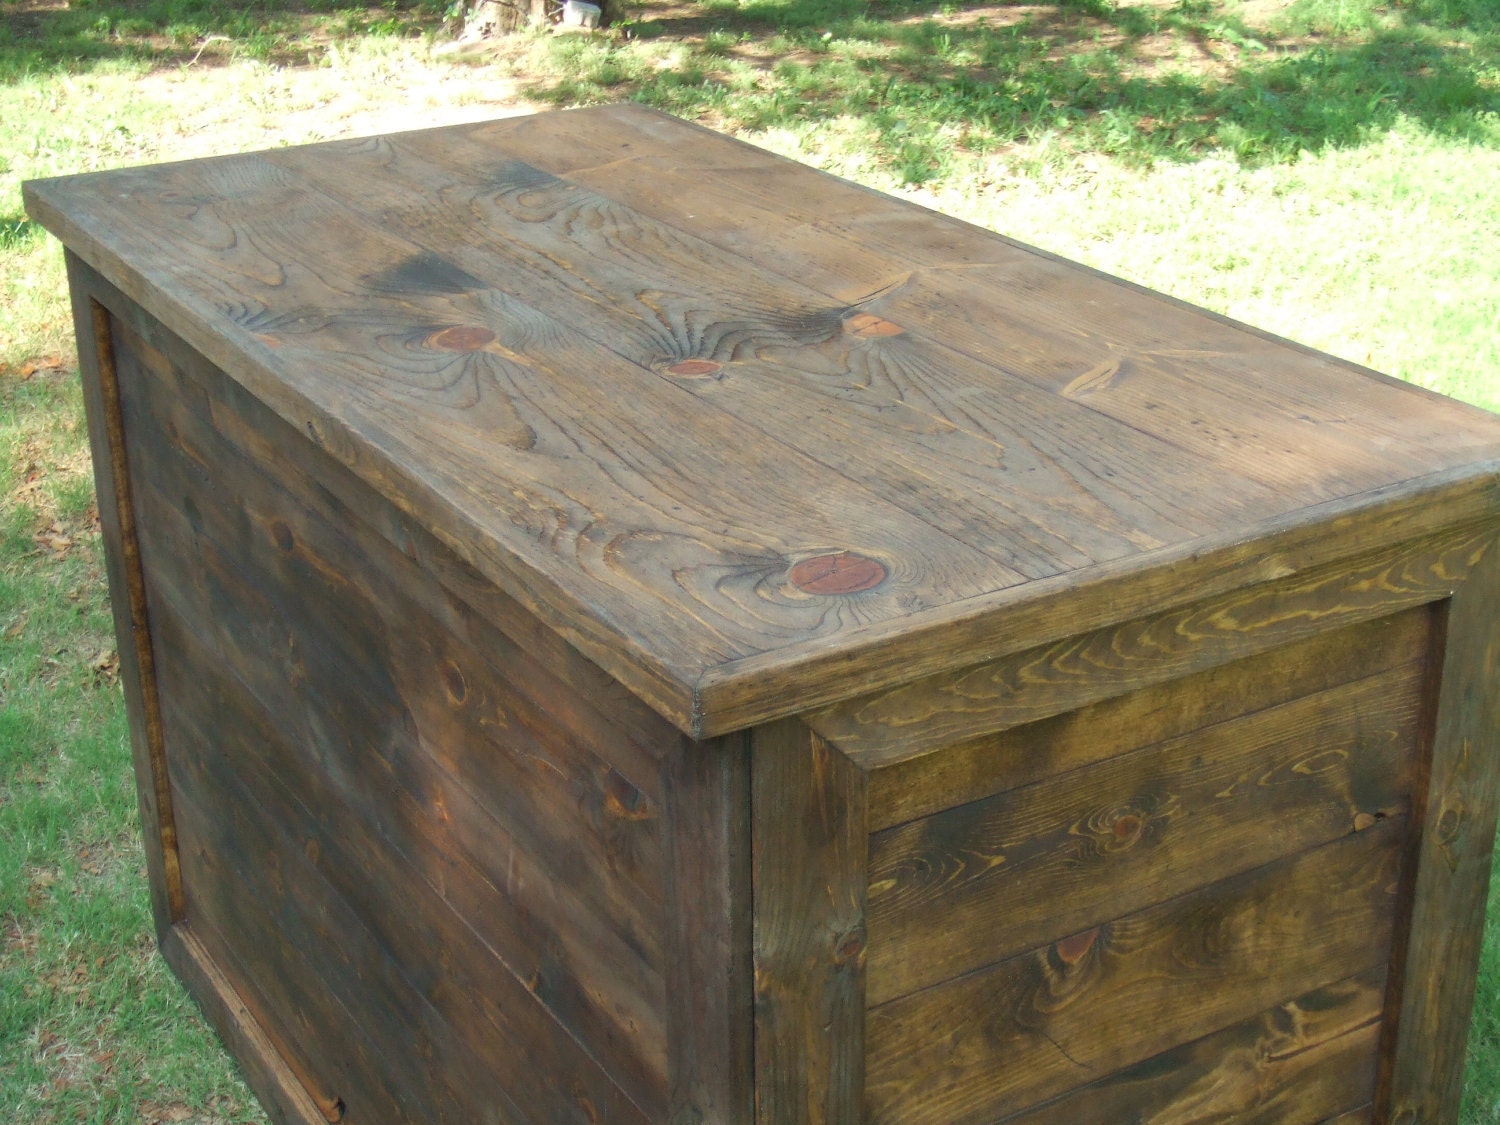 Rustic custom table - farmhouse furniture - portable for display booth - BlackCatHill